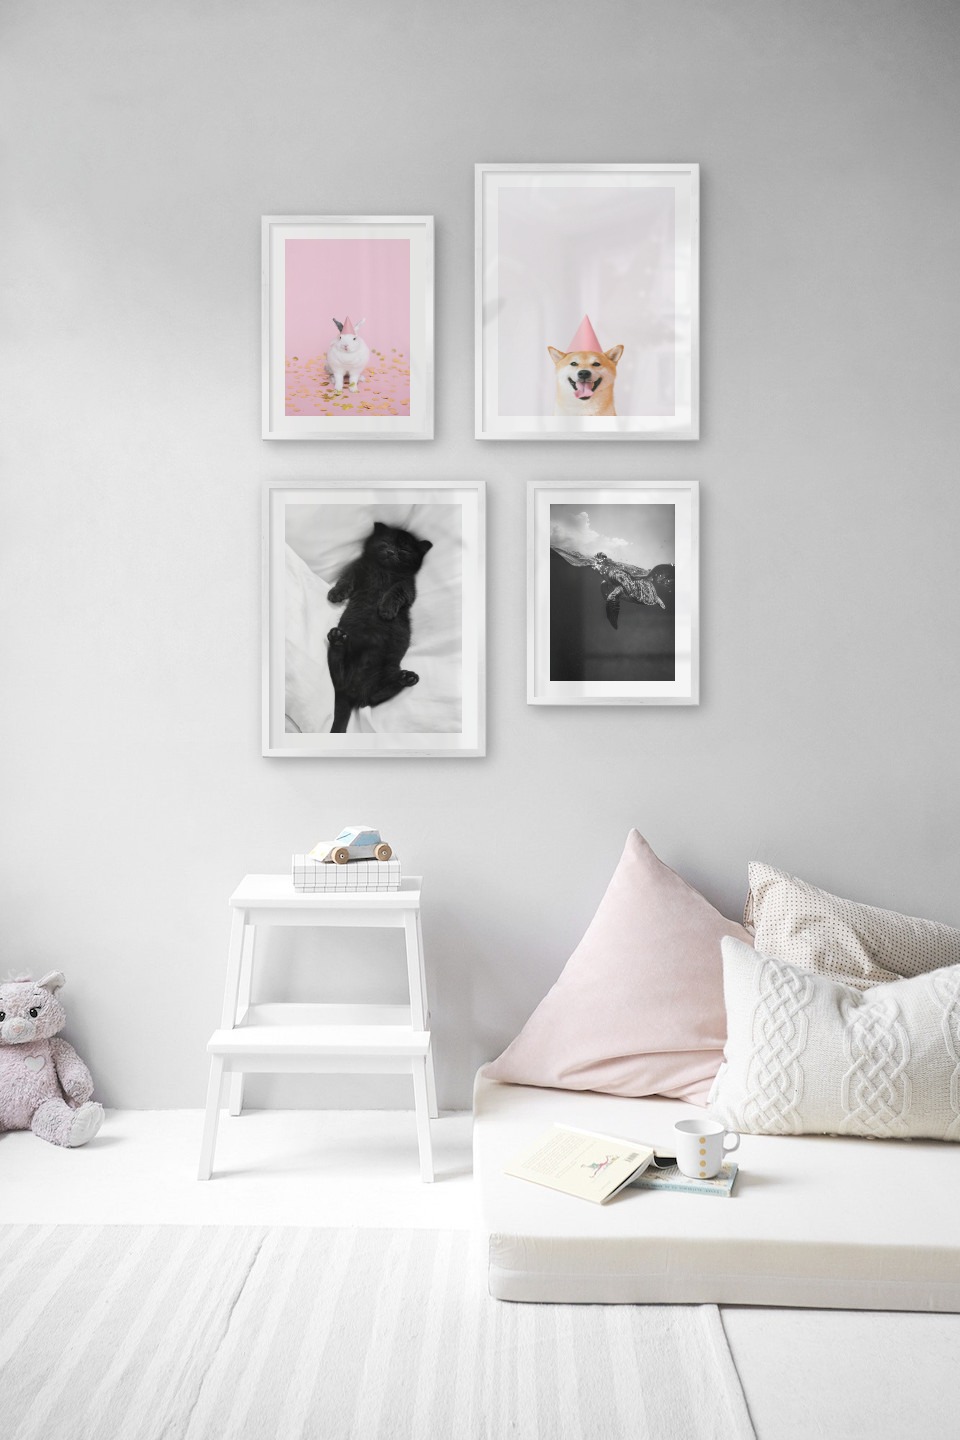 Gallery wall with picture frames in silver in sizes 30x40 and 40x50 with prints "Rabbit with party hat", "Dog with pink hat", "Cat in bed" and "Turtle"